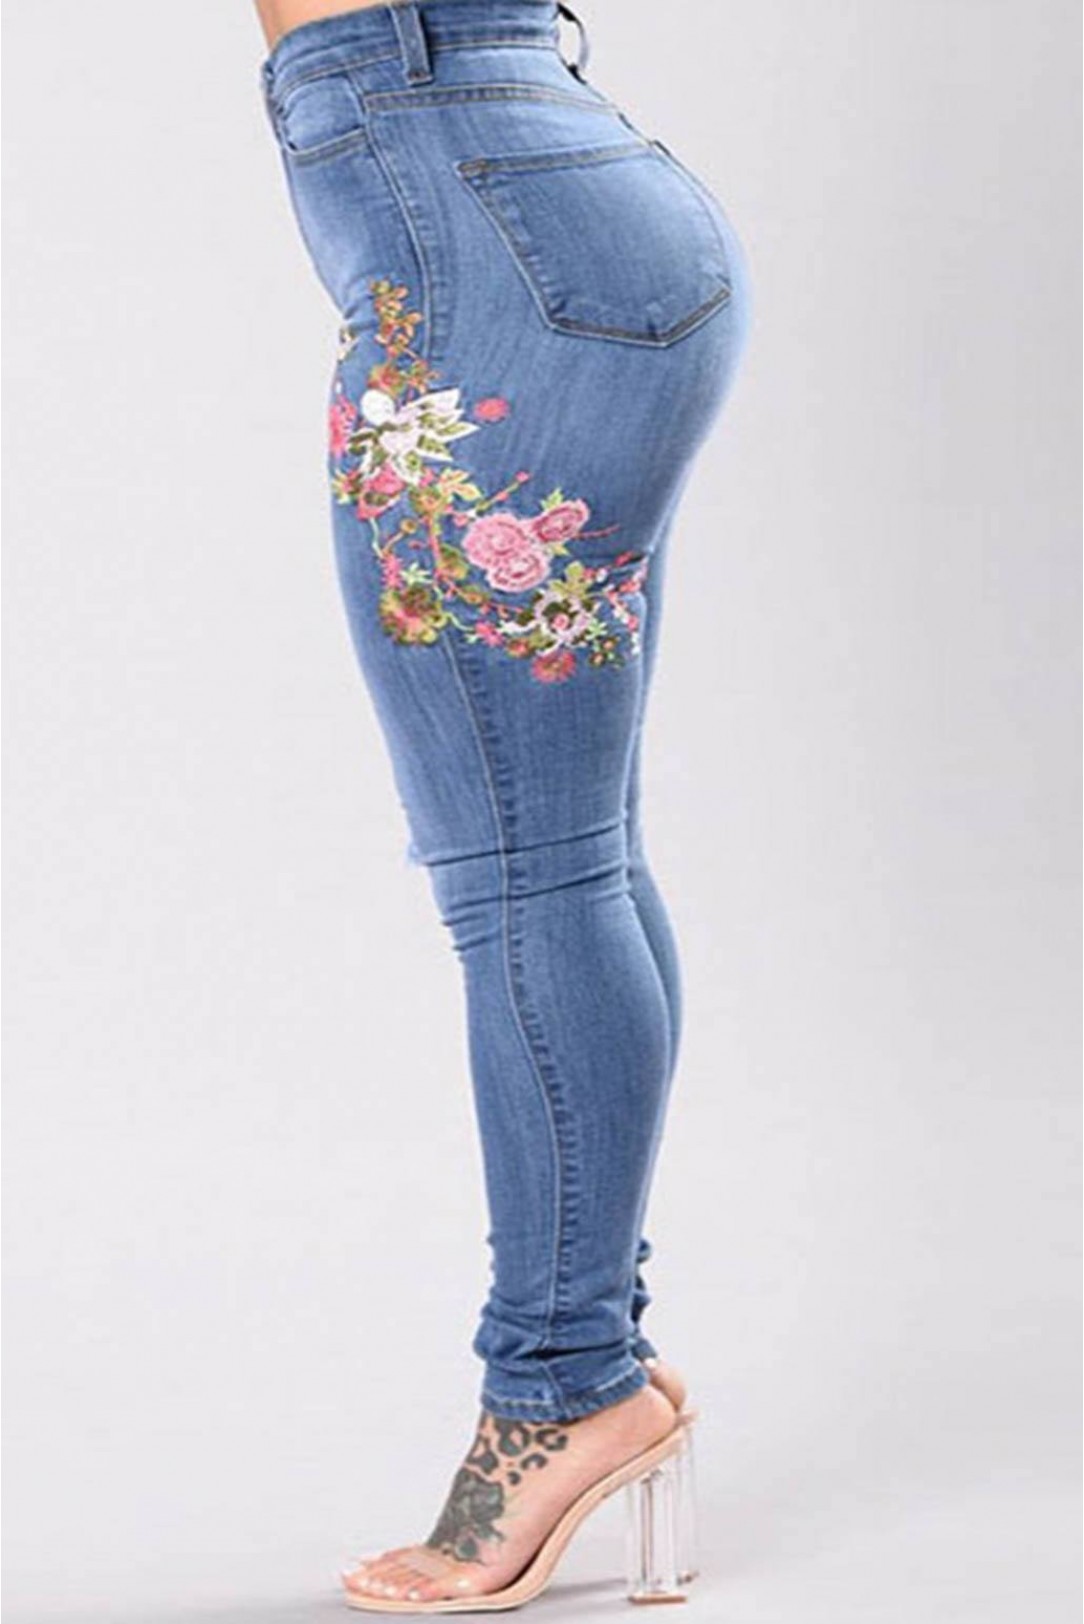 Plus size ripped jeans and floral embroidery 